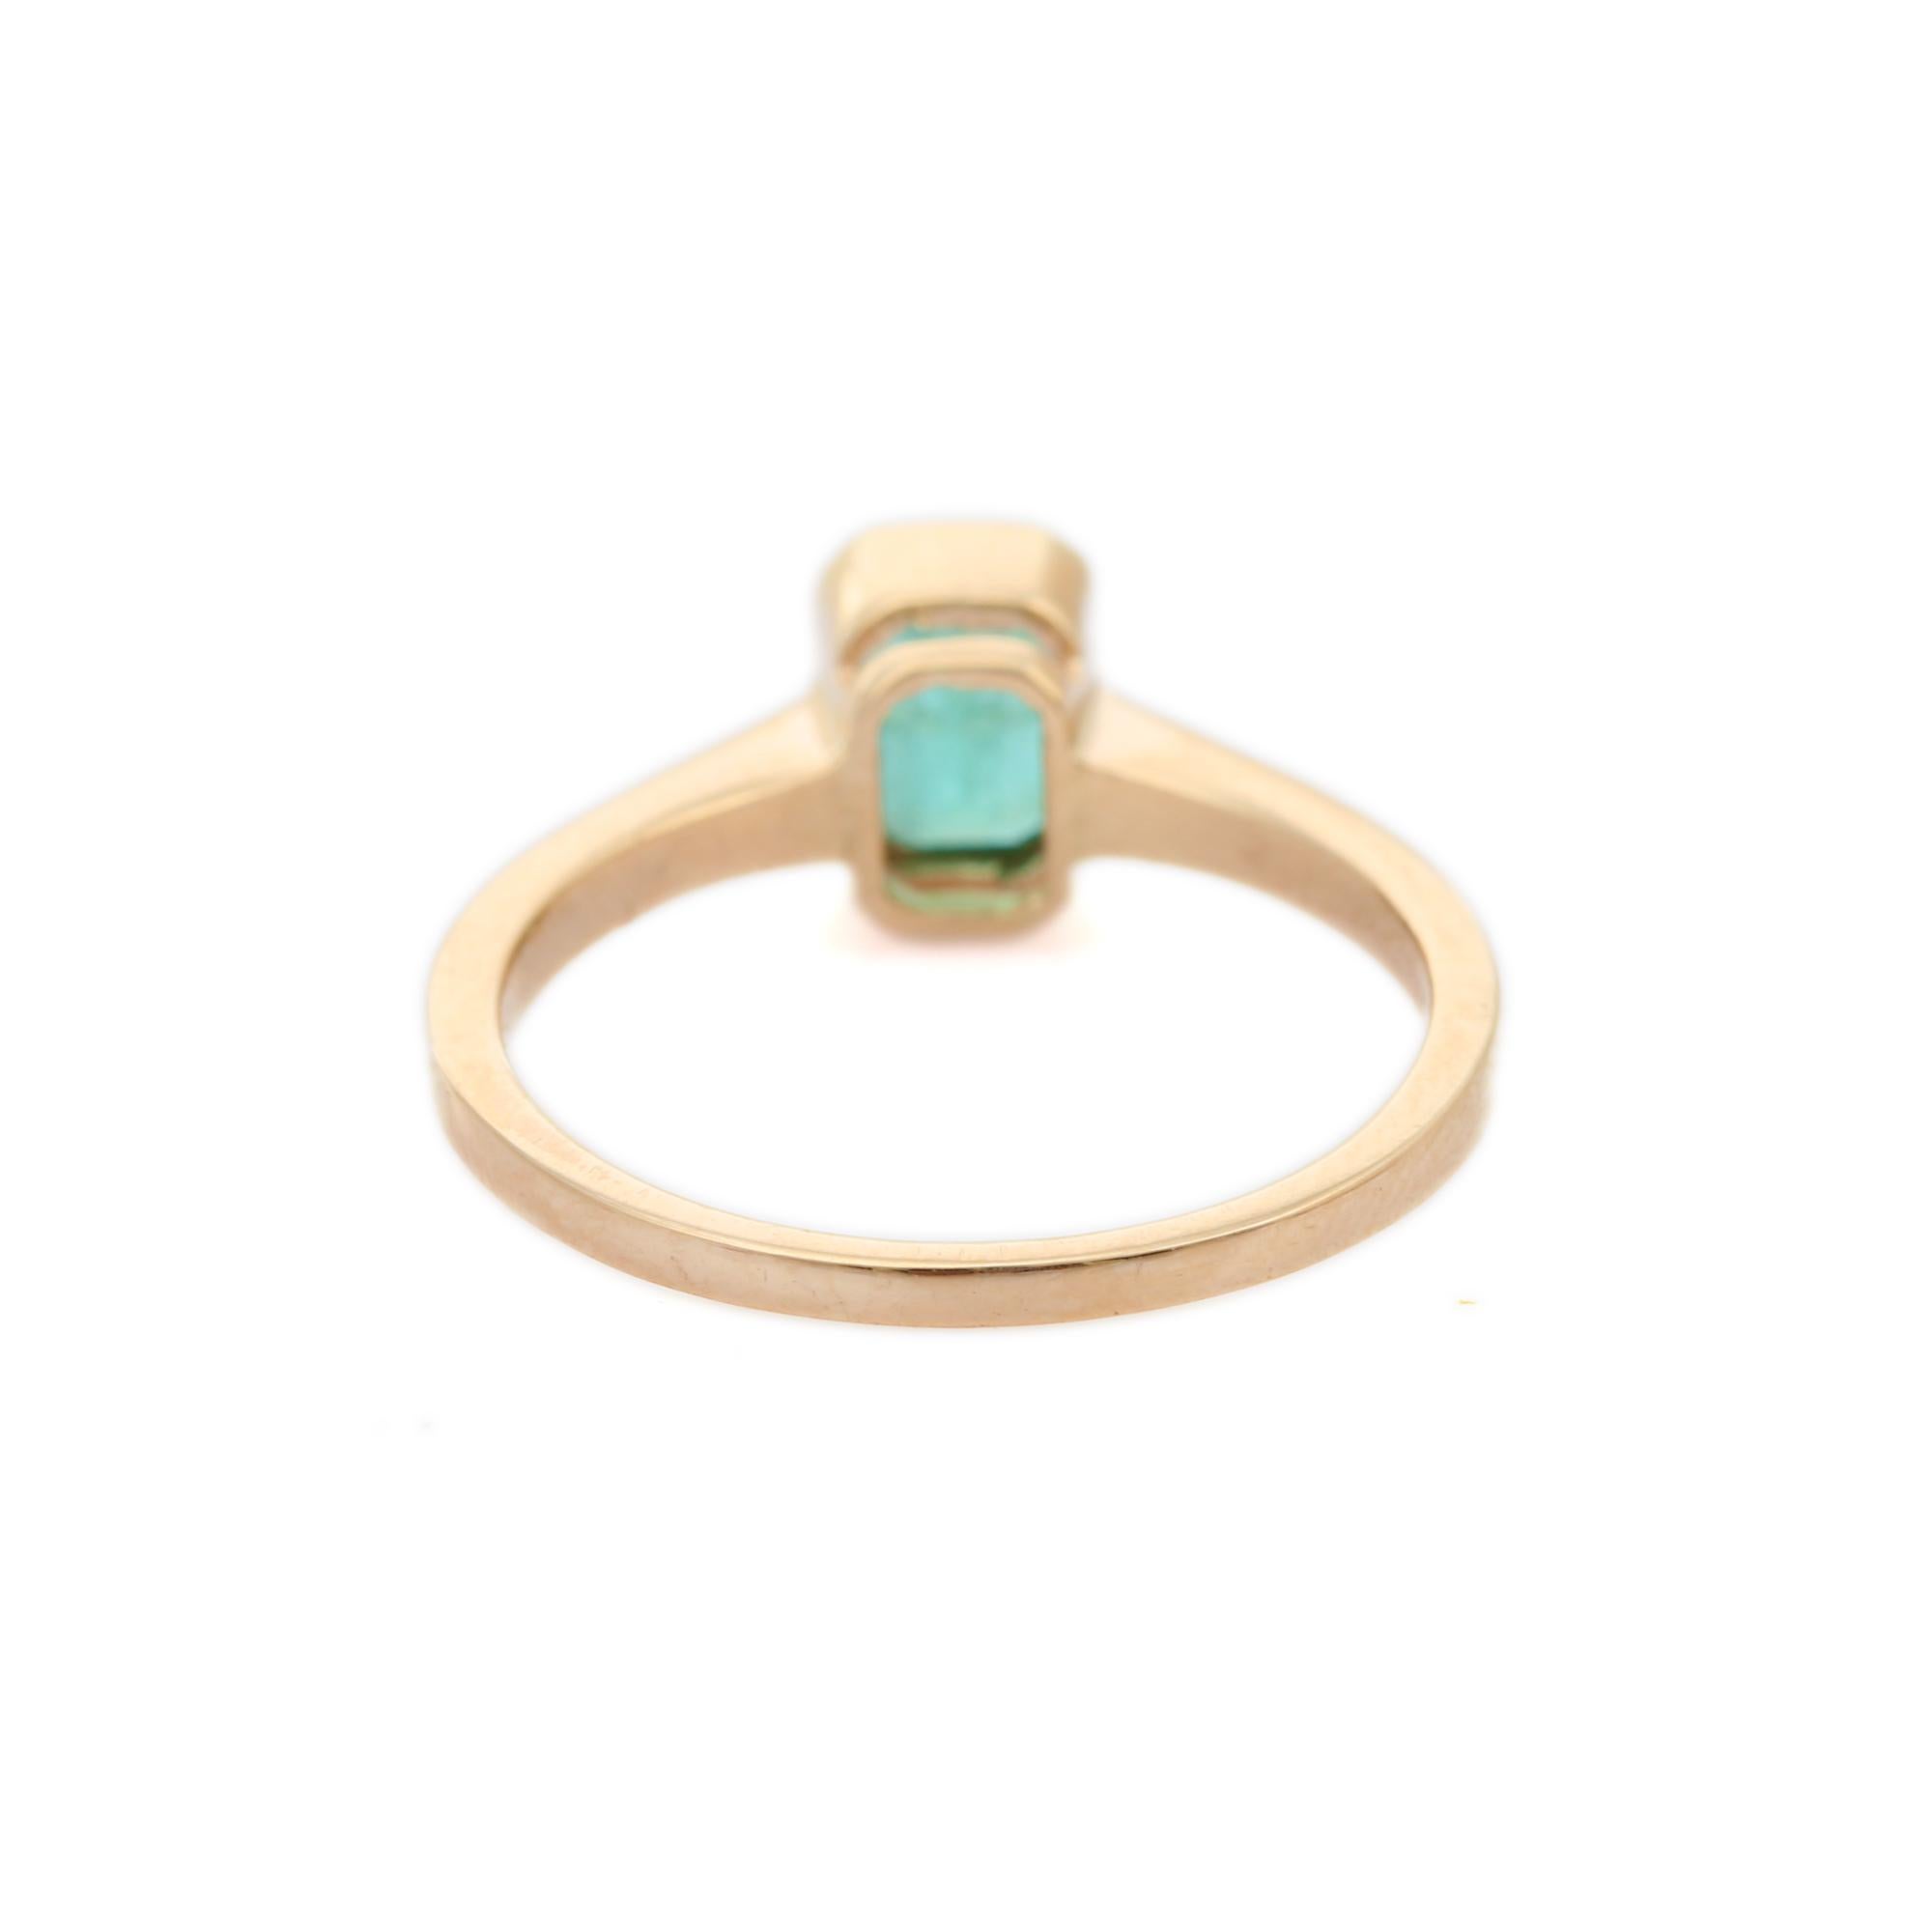 For Sale:  Handmade Bezel Set Emerald Single Stone Ring in 14k Solid Yellow Gold 4